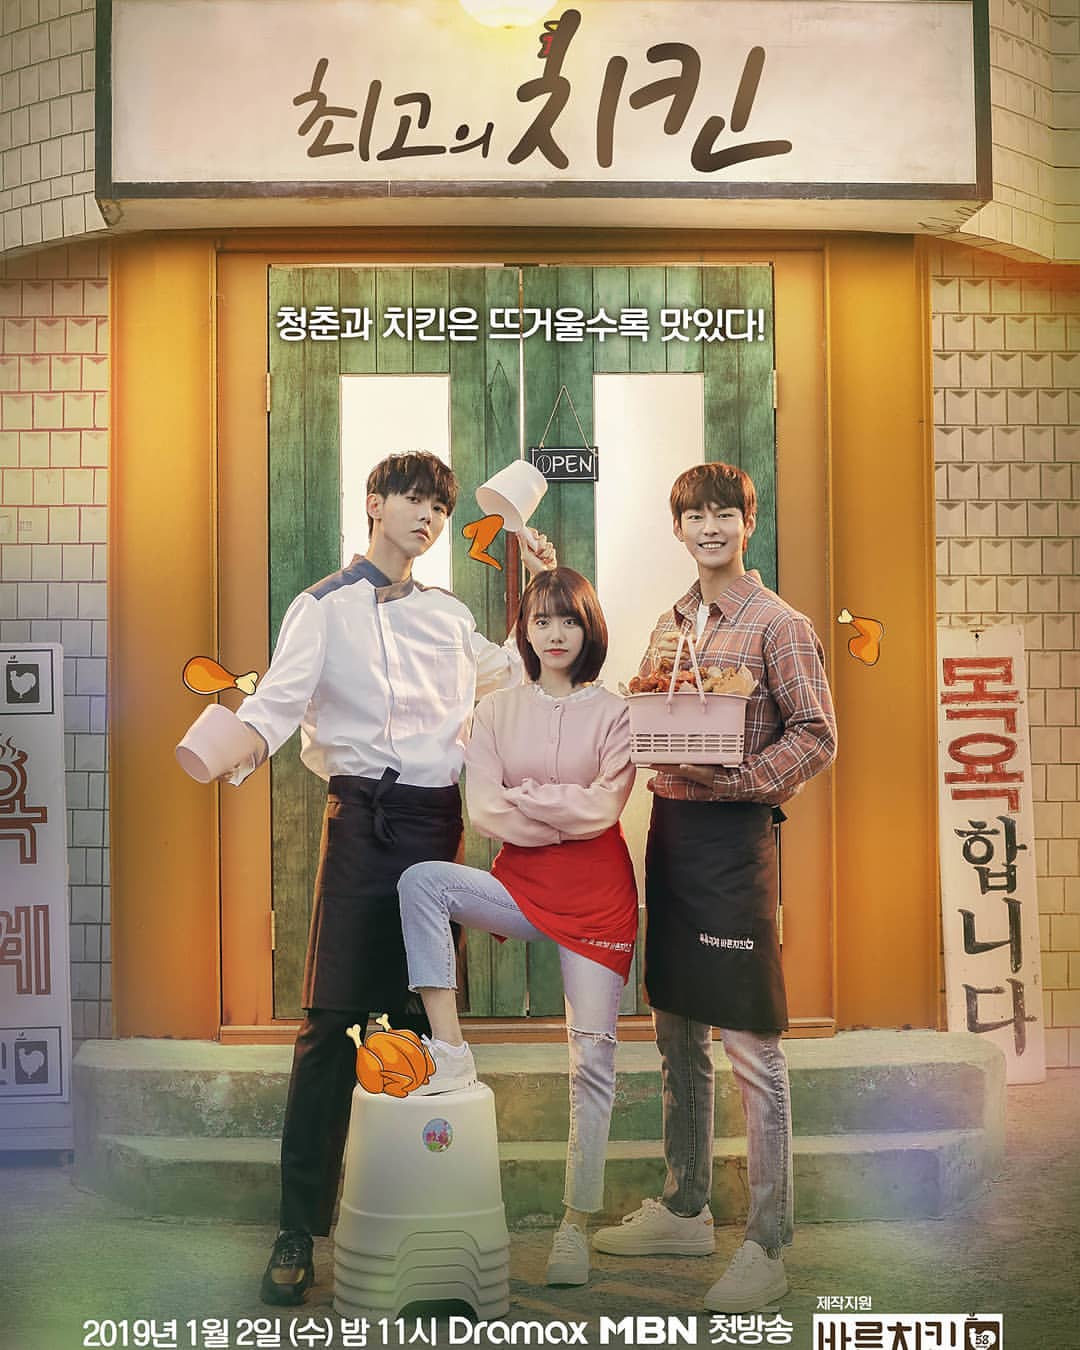 The Best Fried Chicken - Sinopsis, Pemain, OST, Episode, Review